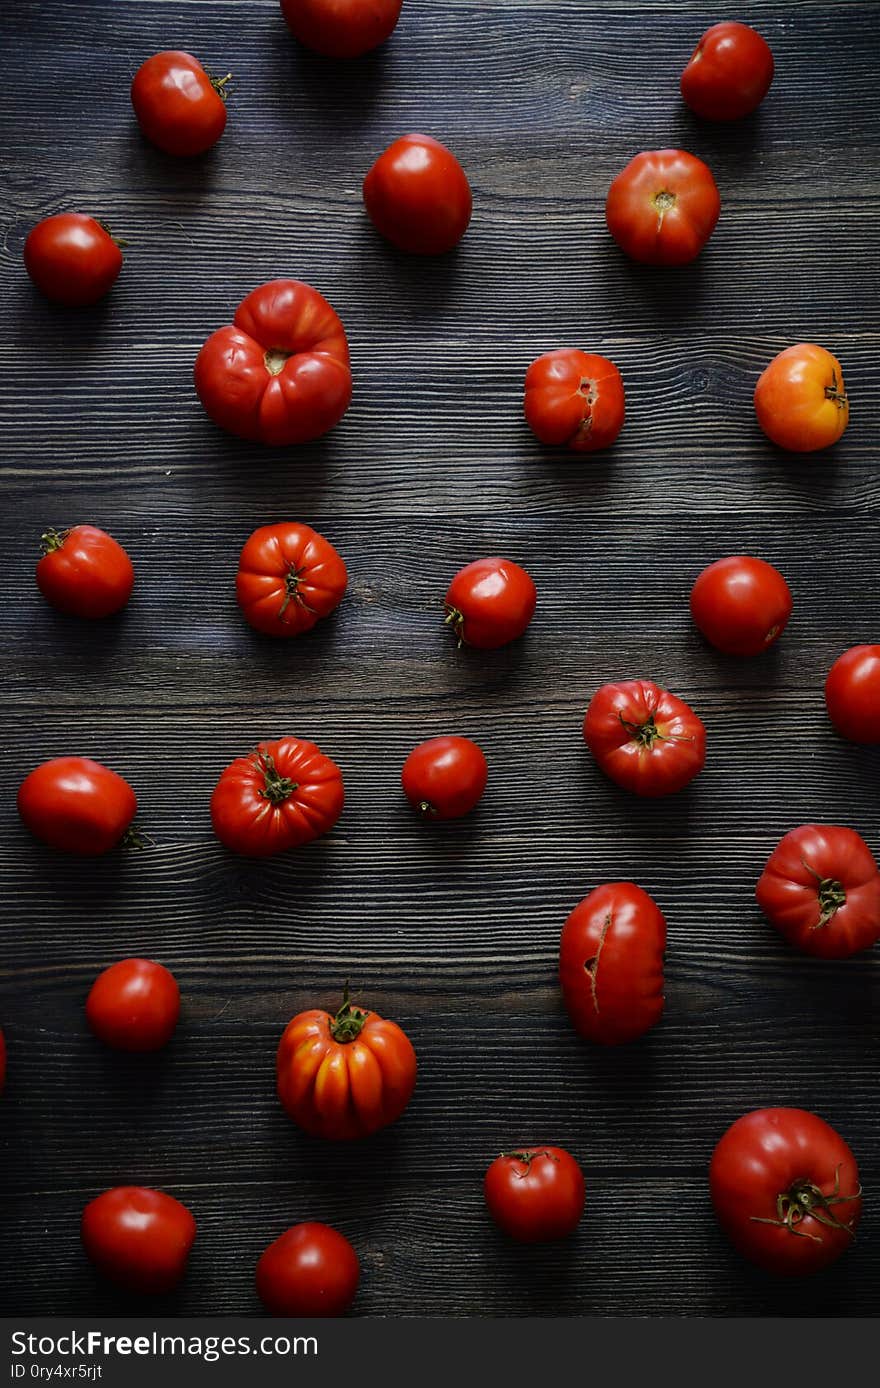 Tomatoes on the old table. Tomatoes pattern. Top view of fresh vegetable on a dark wooden background. Red Food background. Vertical composition isolated on a old rustic wooden surface. Tomatoes on the old table. Tomatoes pattern. Top view of fresh vegetable on a dark wooden background. Red Food background. Vertical composition isolated on a old rustic wooden surface